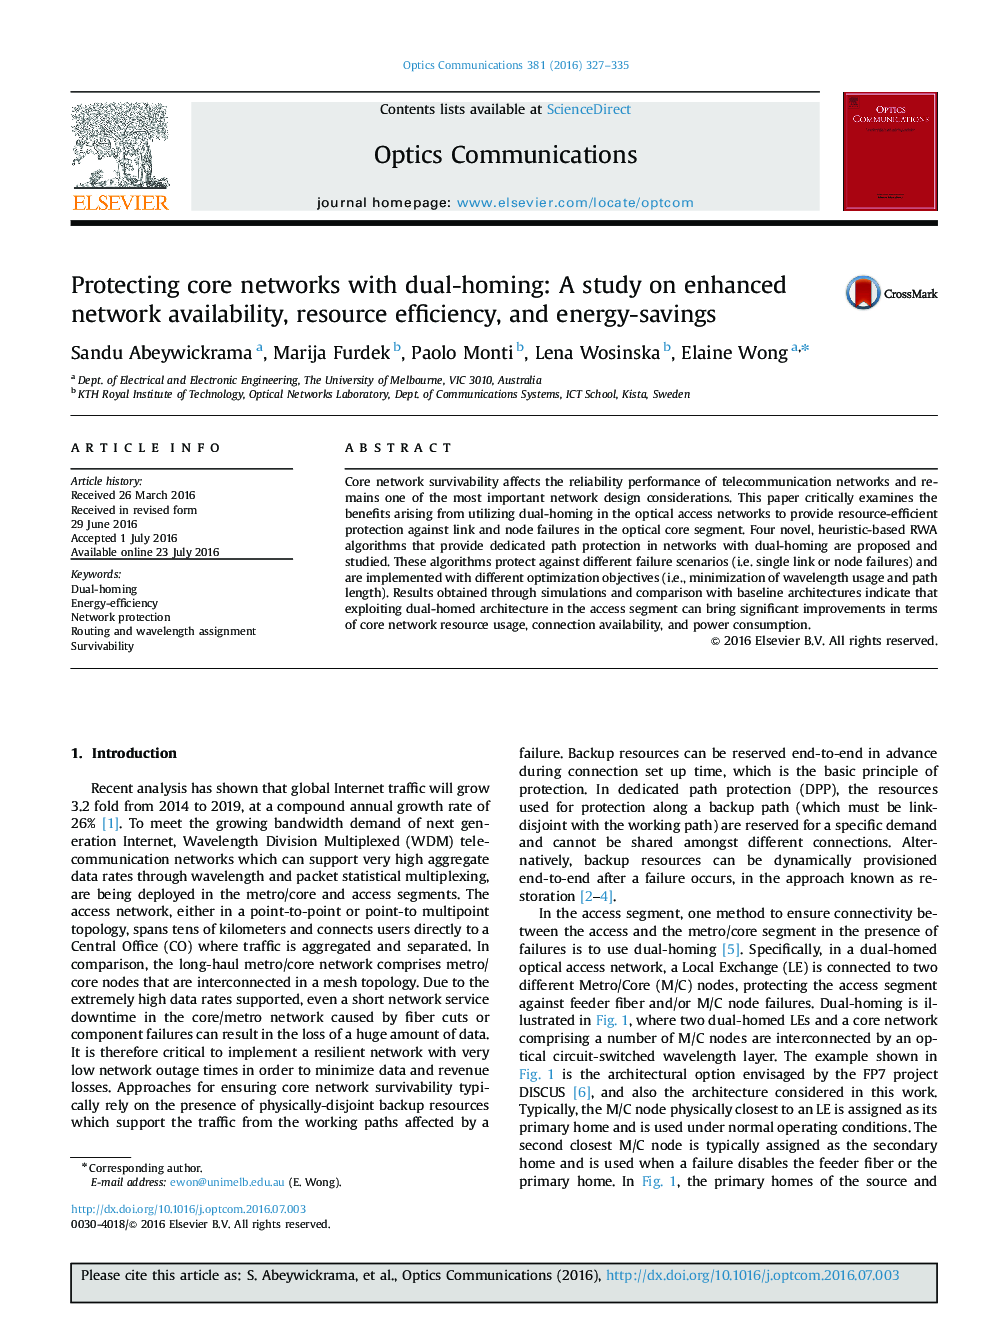 Protecting core networks with dual-homing: A study on enhanced network availability, resource efficiency, and energy-savings